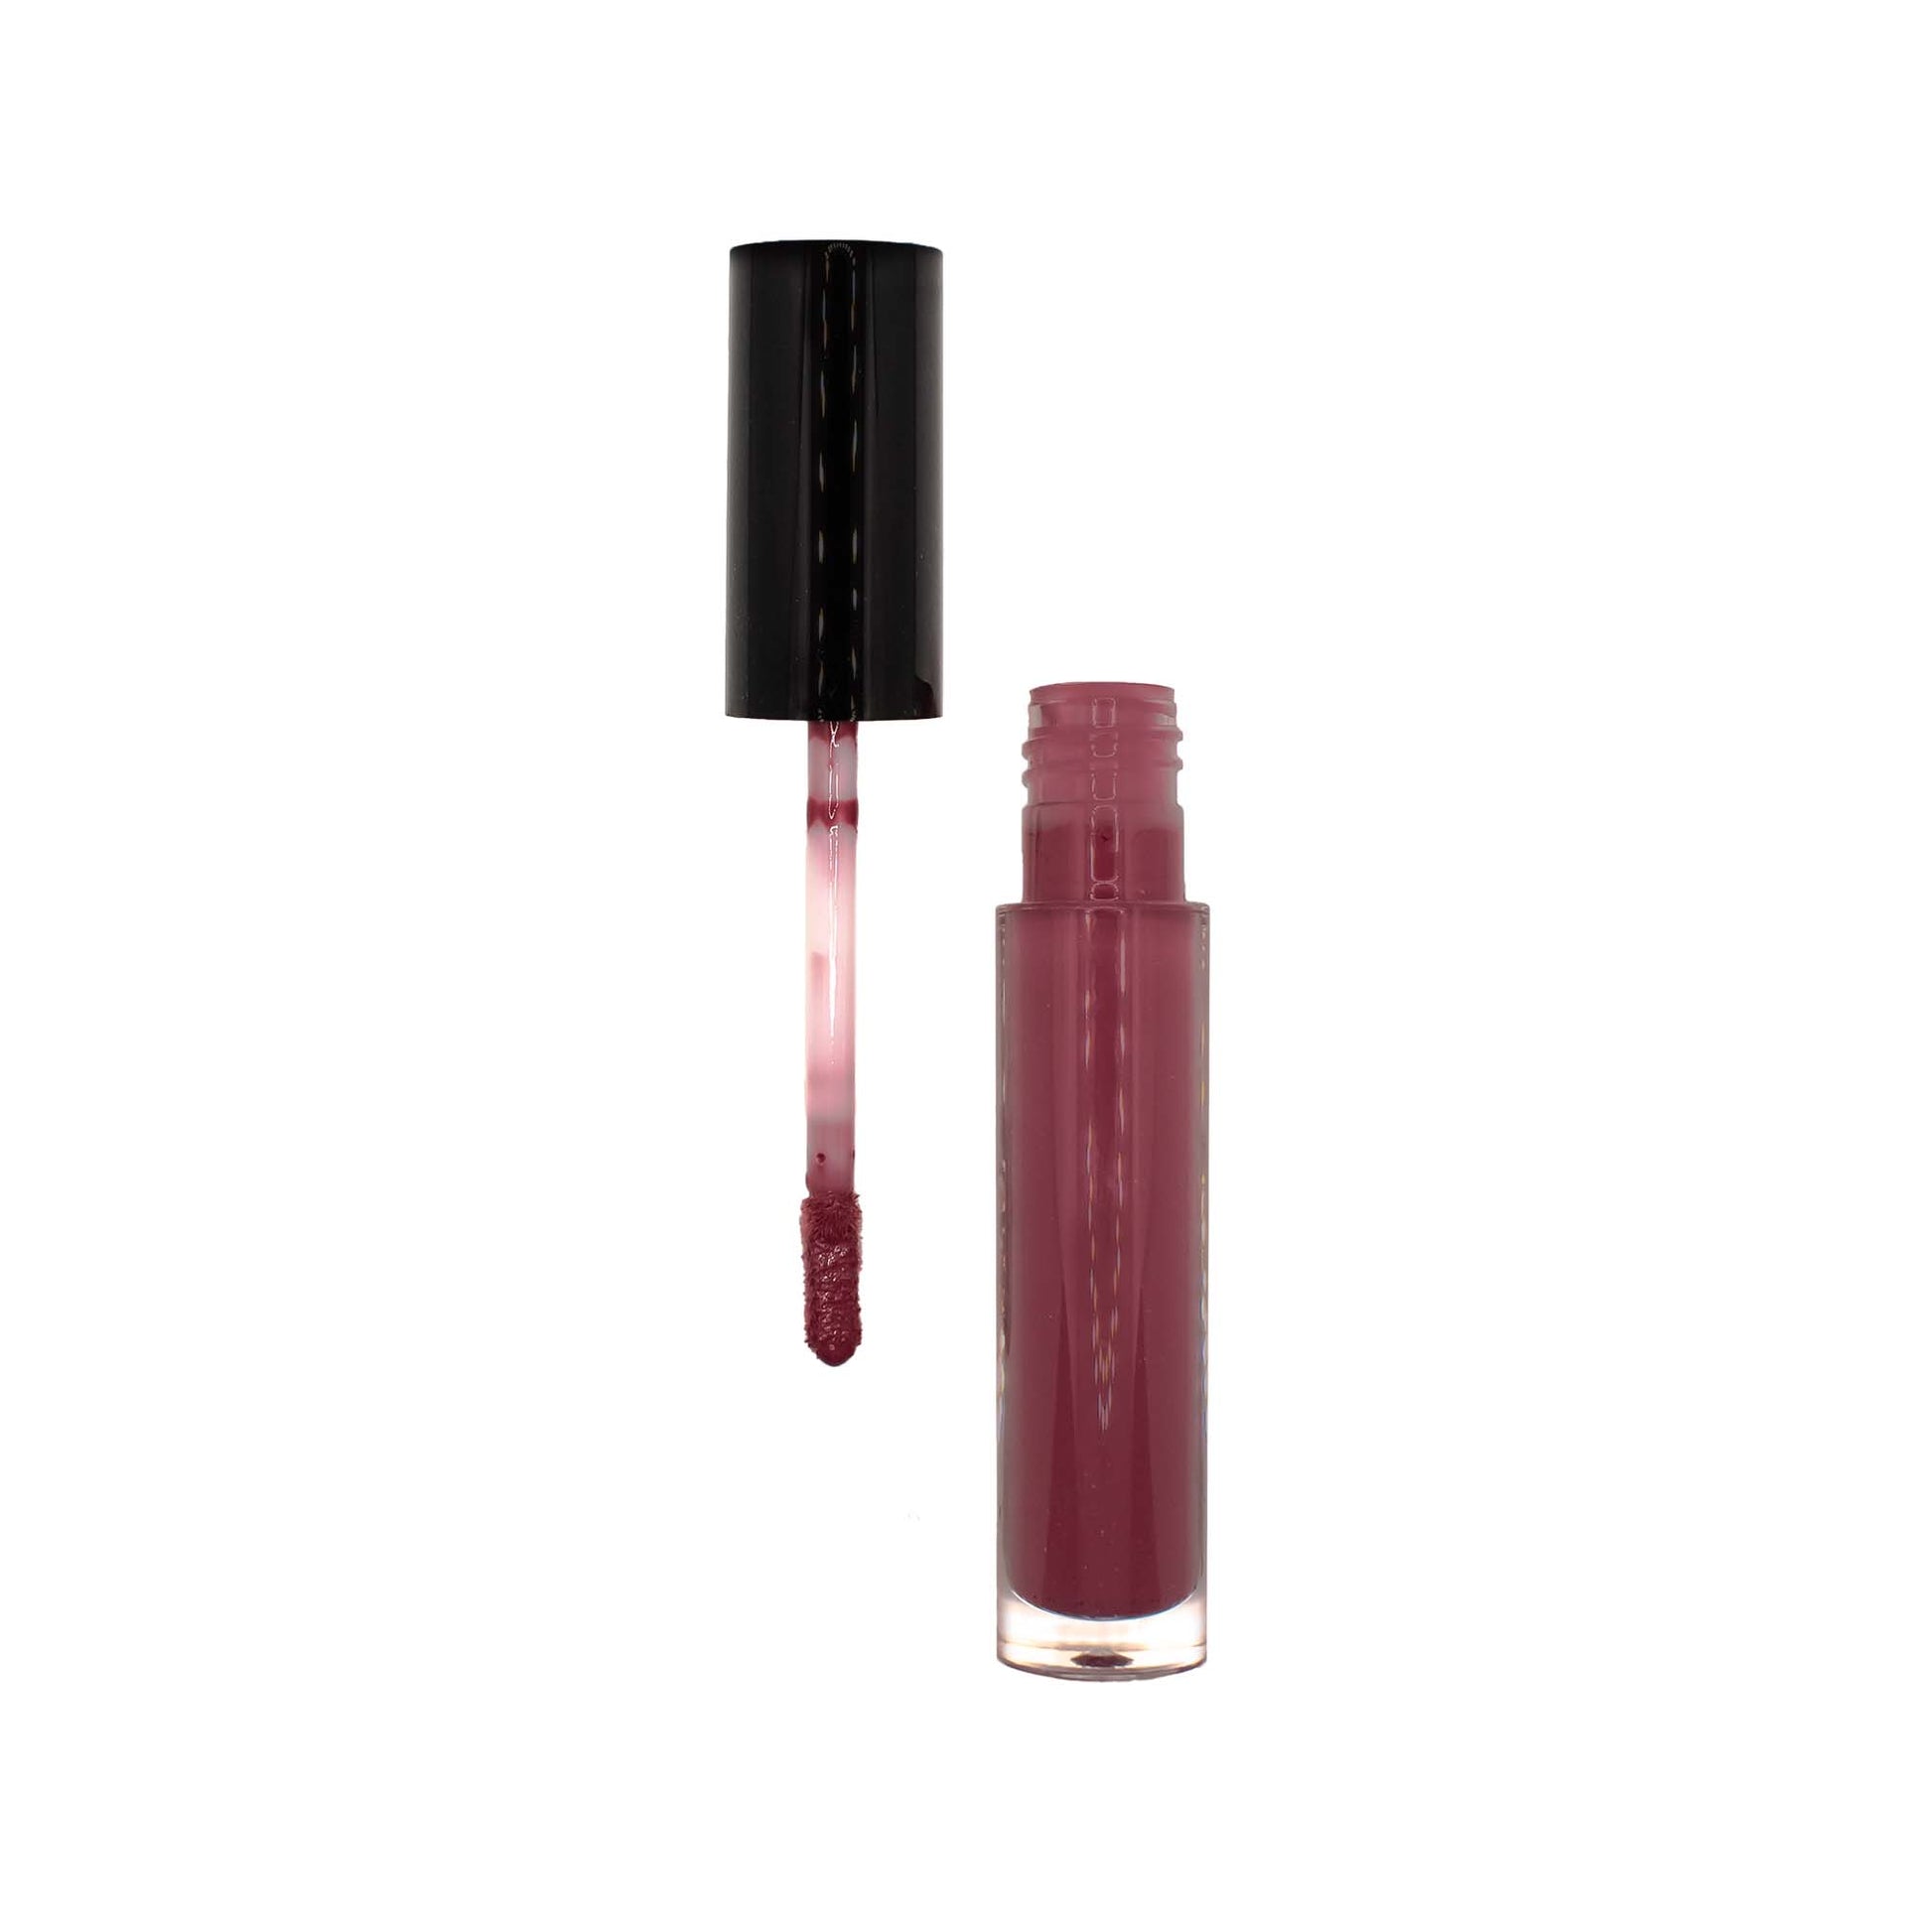 Cruisin Organics Seduction Liquid Lip Gloss with SPF protection. Ladies adore the sensation of a brief moment of seduction. Valentine's Day is quickly approaching, and Cruisin Organics' Seduction lip gloss is now available! Ladies, shop now at our online store.